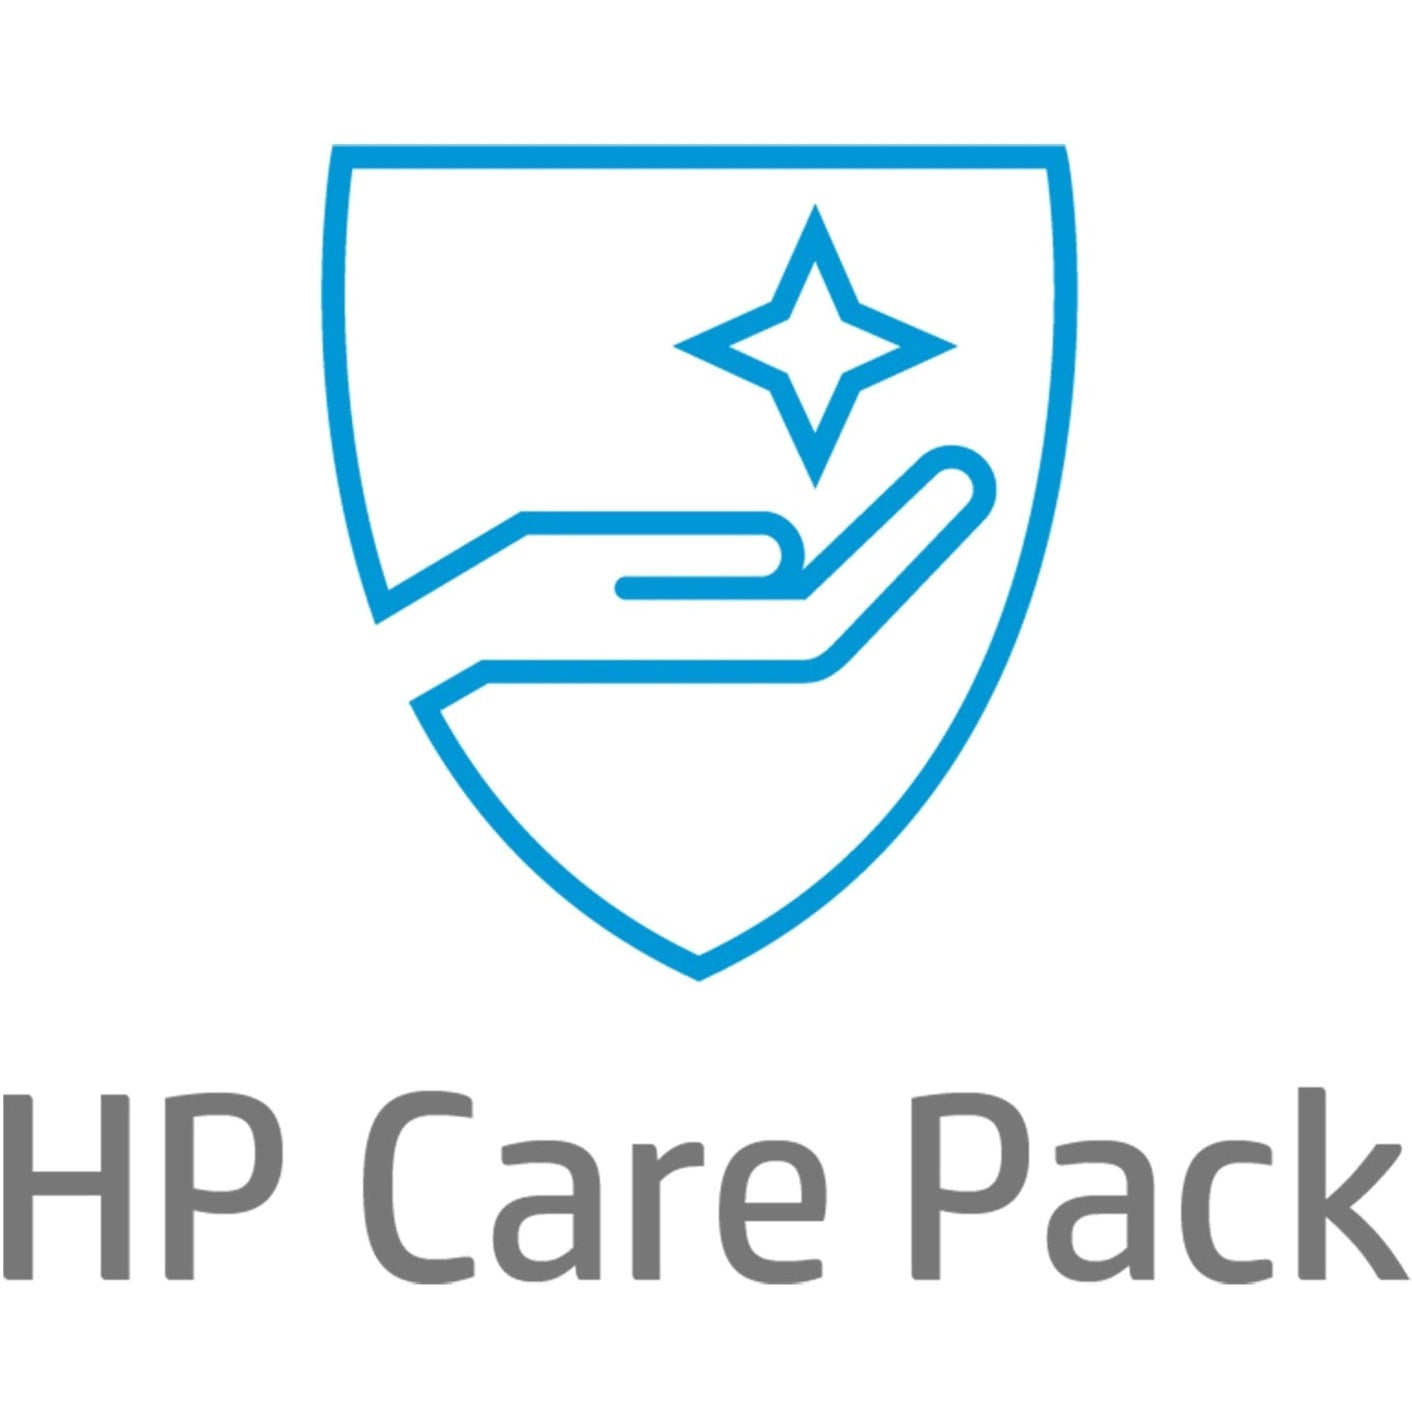 HP Care Pack - Extended Service - 2 Year - Service (UM959E)